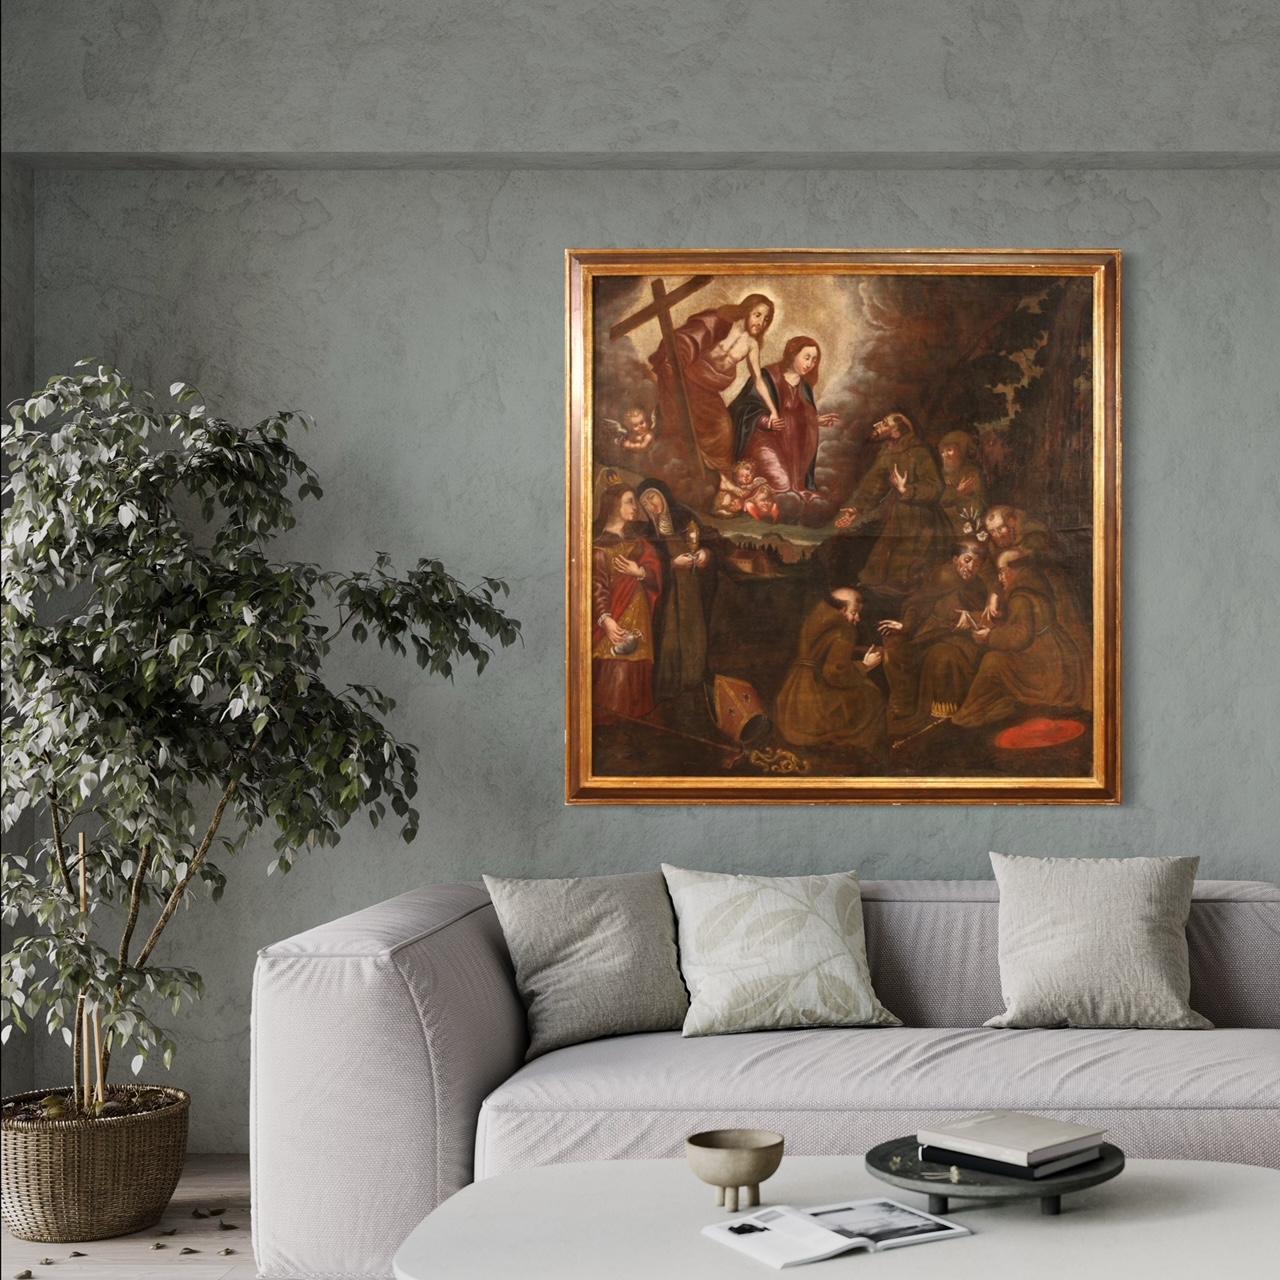 Antique Spanish painting from the 18th century. Artwork oil on canvas depicting a religious subject, Adoration of Saints with Christ and the Virgin Mary, of good pictorial quality. The painter places numerous saints in the lower part, including